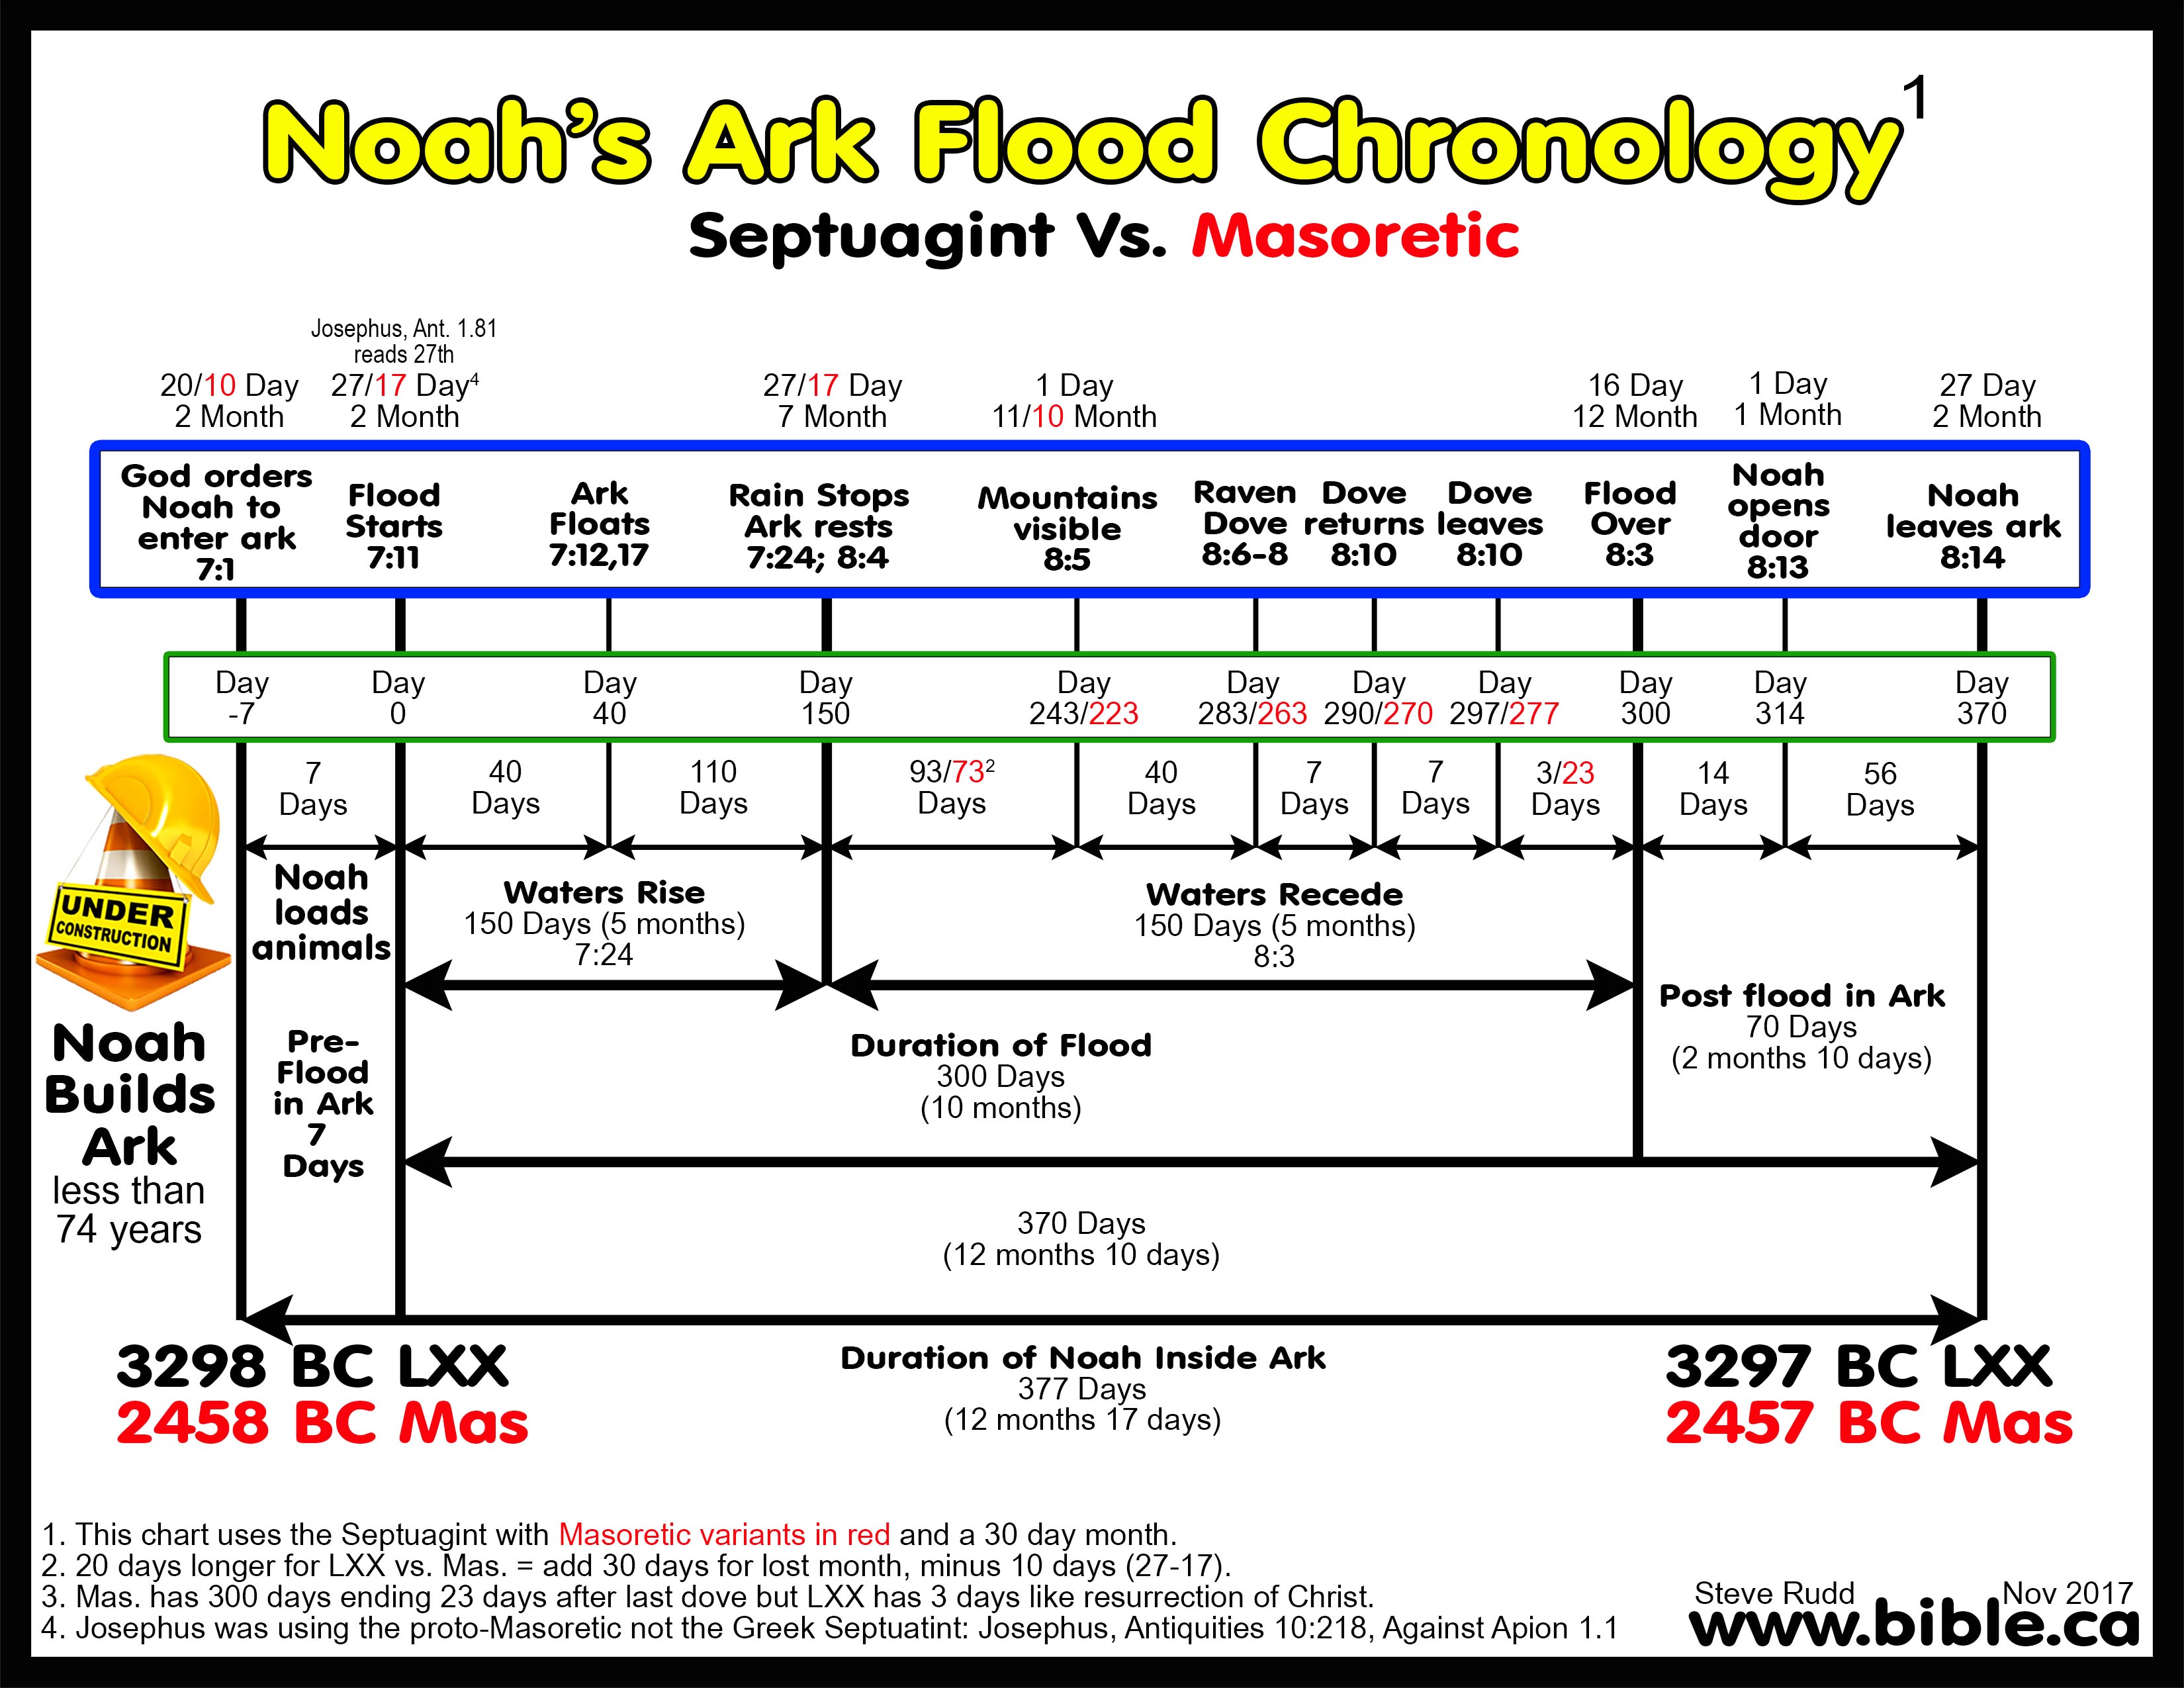 Chronology of Noah’s Flood Single Textual Variants in the Book of Genesis